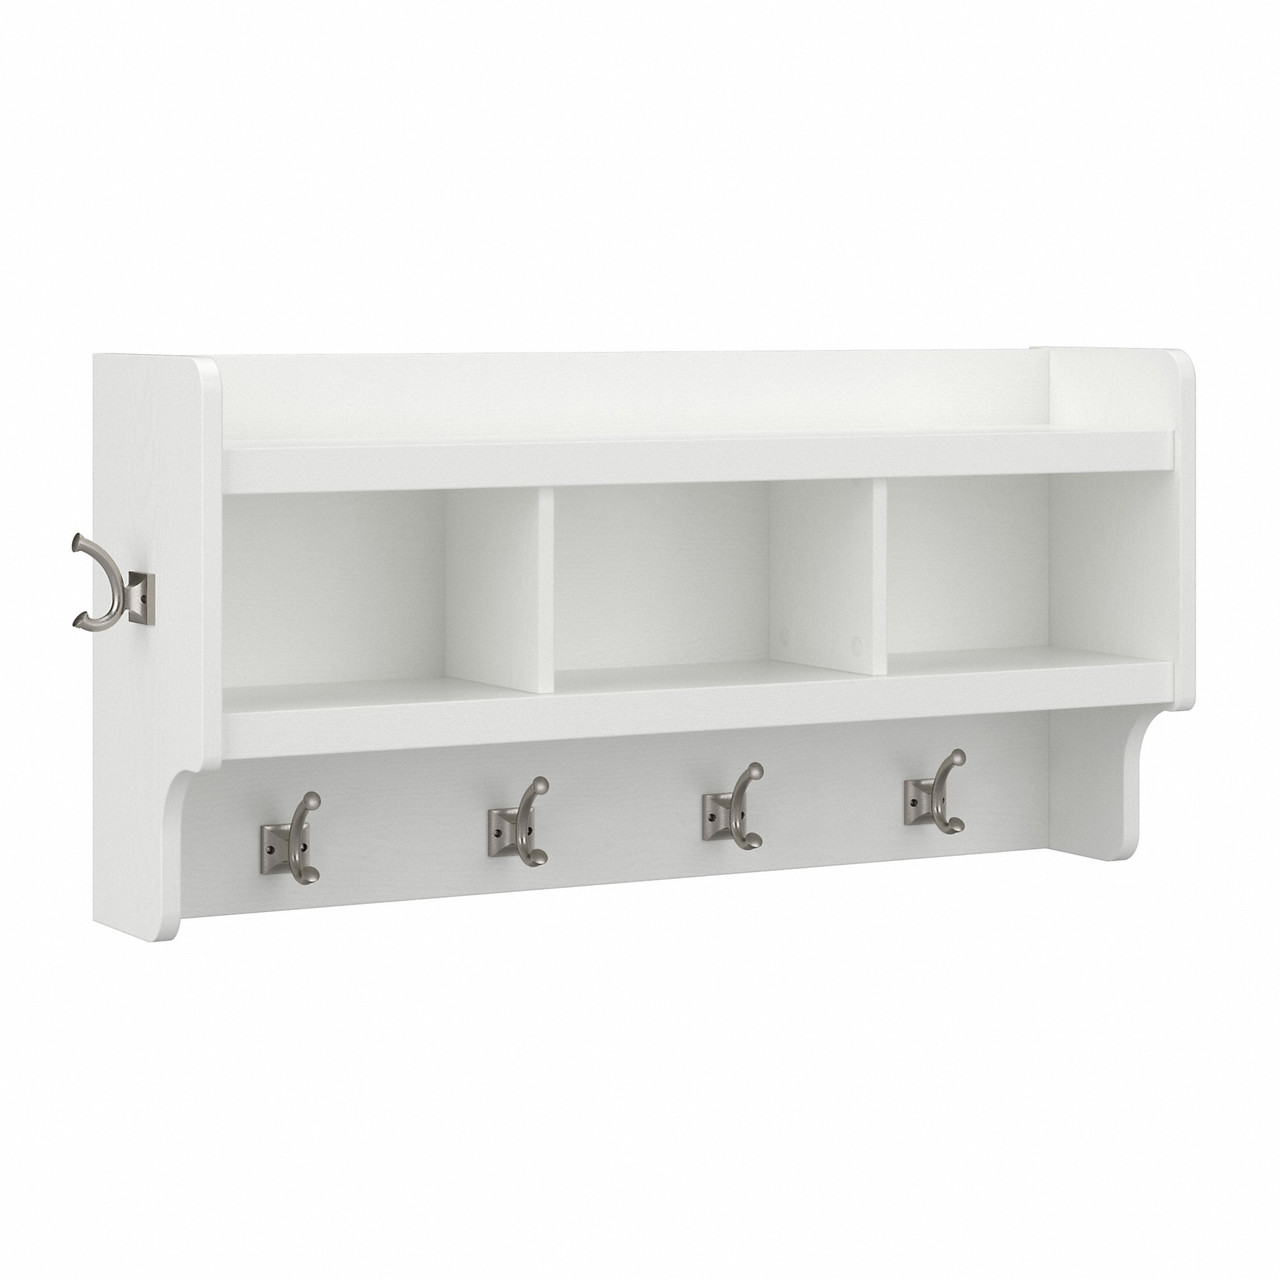 Kathy Ireland® Home by Bush Furniture Woodland 40W Wall Mounted Coat Rack  with Shelf in White Ash - WDH340WAS-03 Free Shipping!